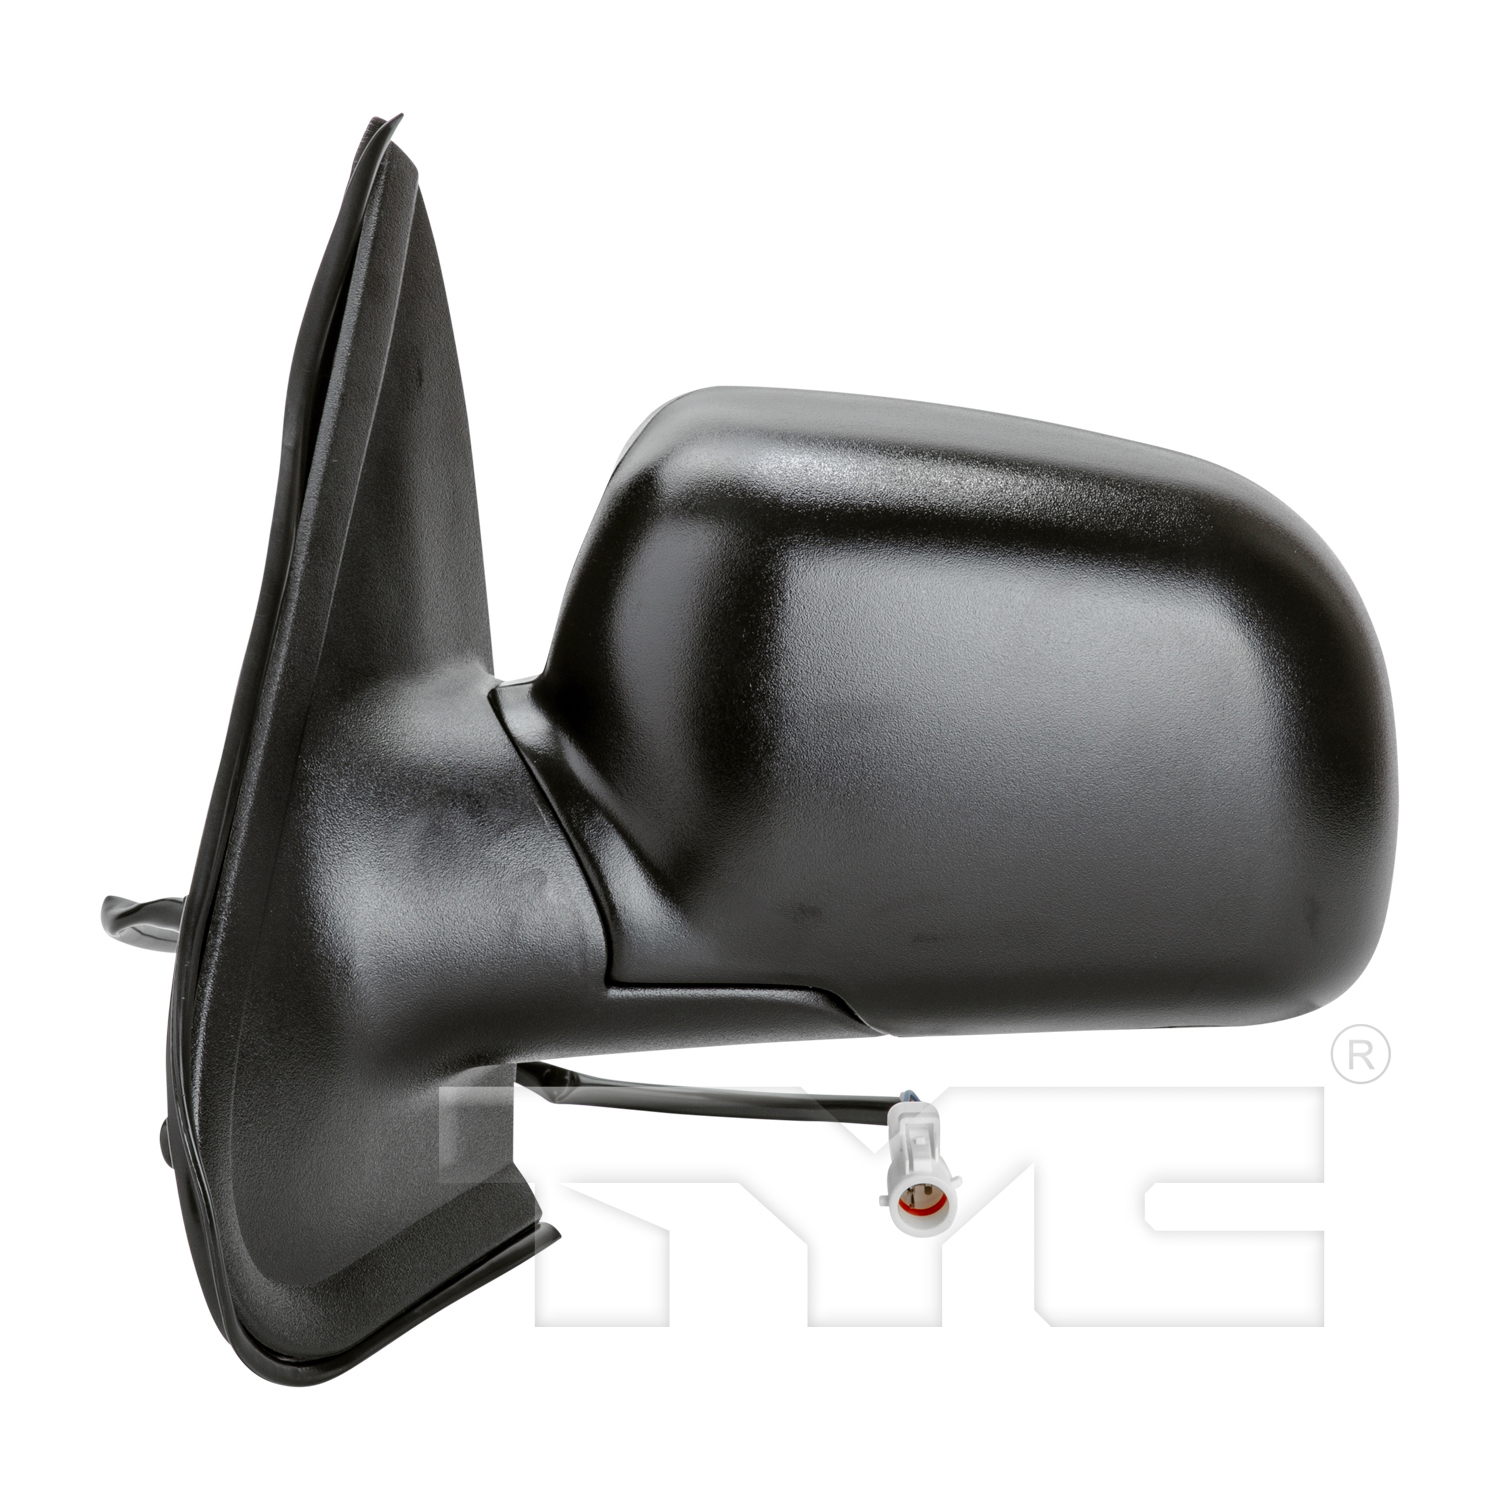 Aftermarket MIRRORS for FORD - EXPLORER SPORT, EXPLORER SPORT,01-03,LT Mirror outside rear view